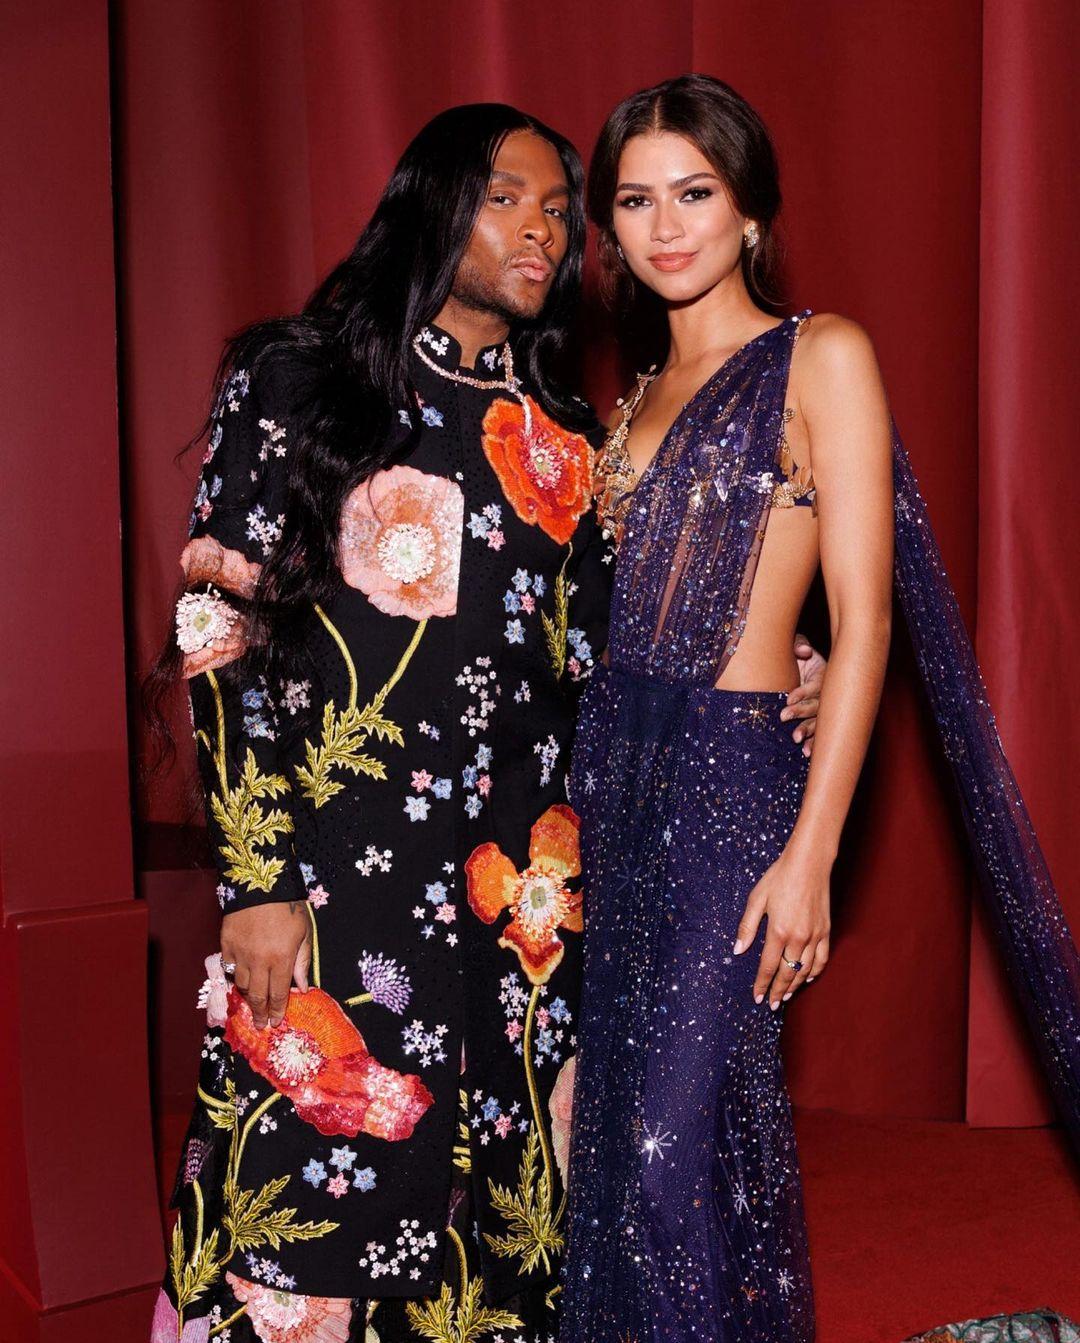 Law Roach and Zendaya hit the red carpet after his retirement